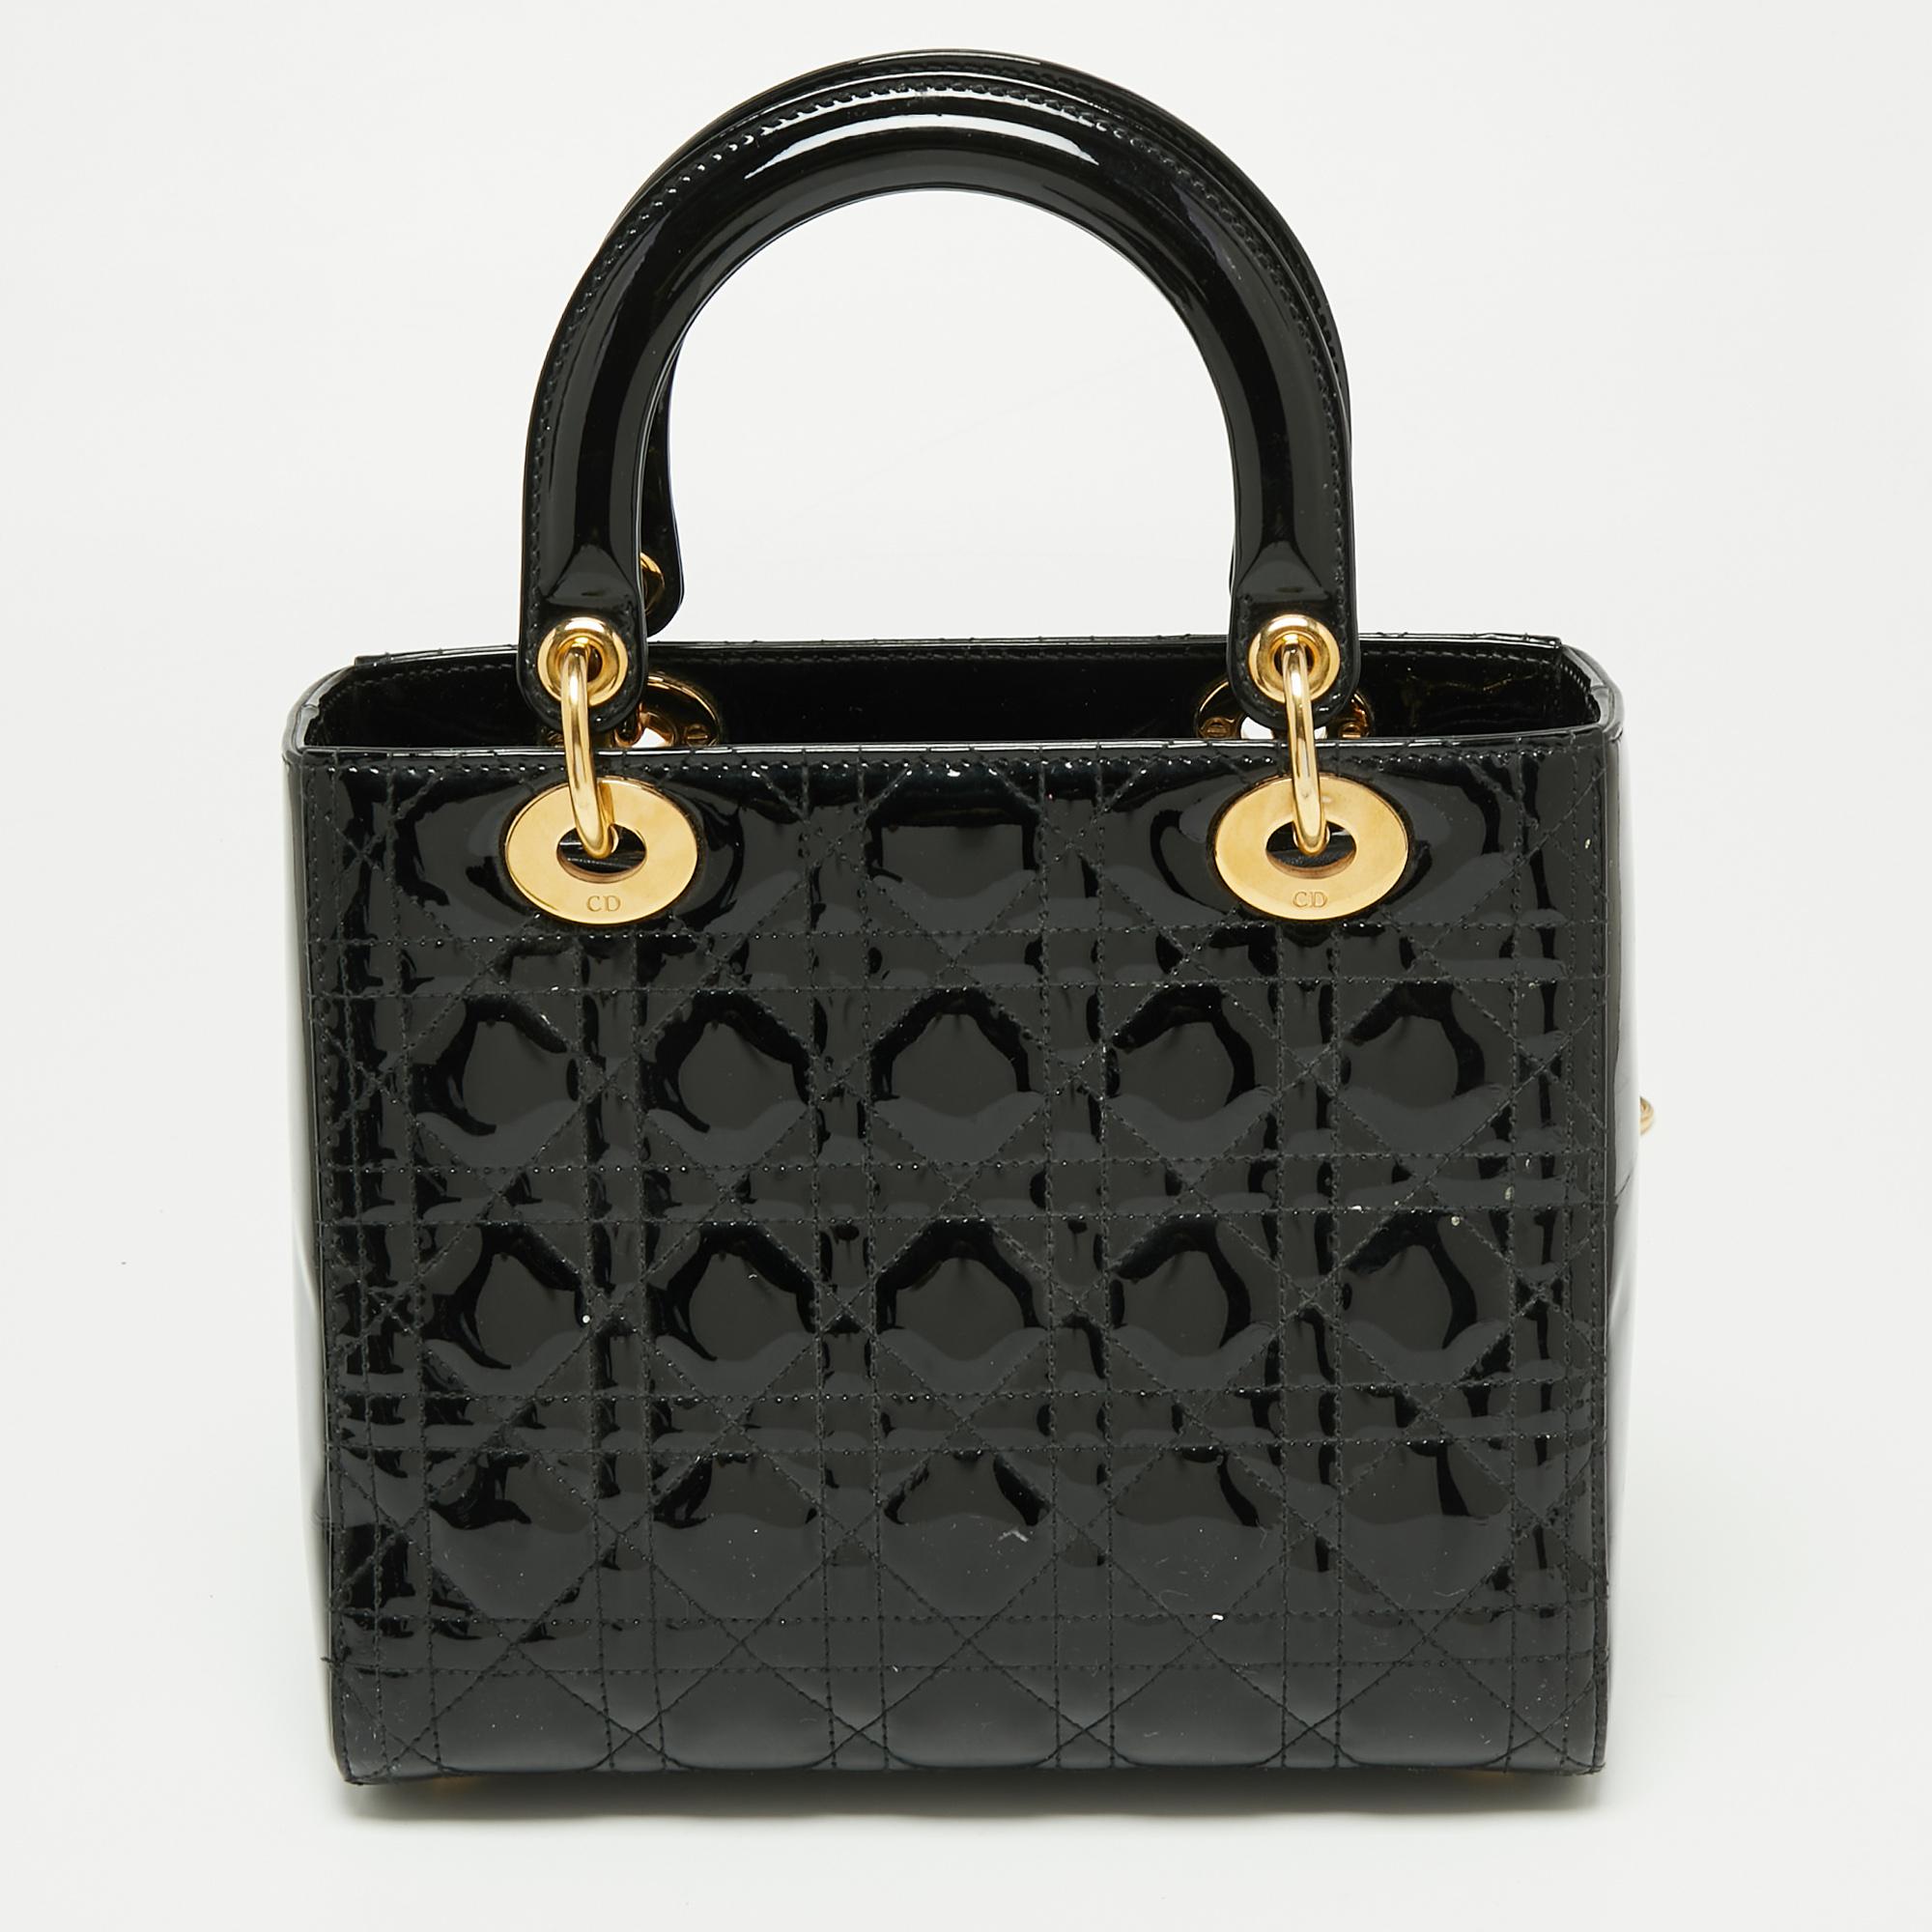 The Lady Dior tote from the house of Dior is a must-have among fashionistas. This black tote has been crafted from patent leather and it carries the signature Cannage quilt. It is equipped with a roomy interior and two top handles. The gorgeous